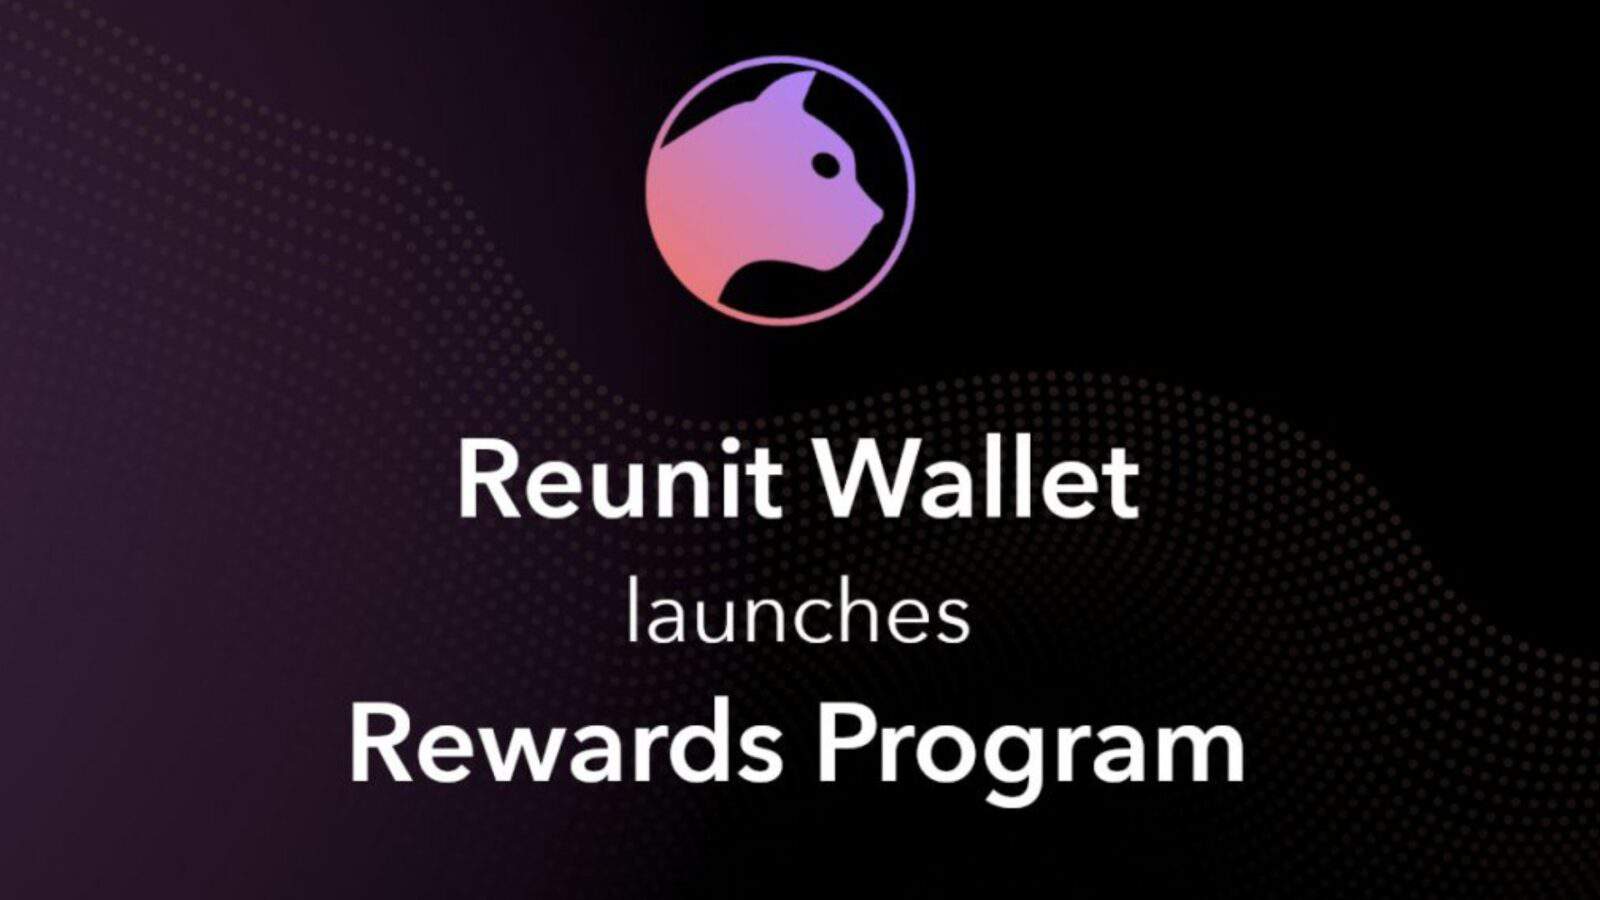 Profit More from Your Trades with Reunit Wallet's New Reward Program